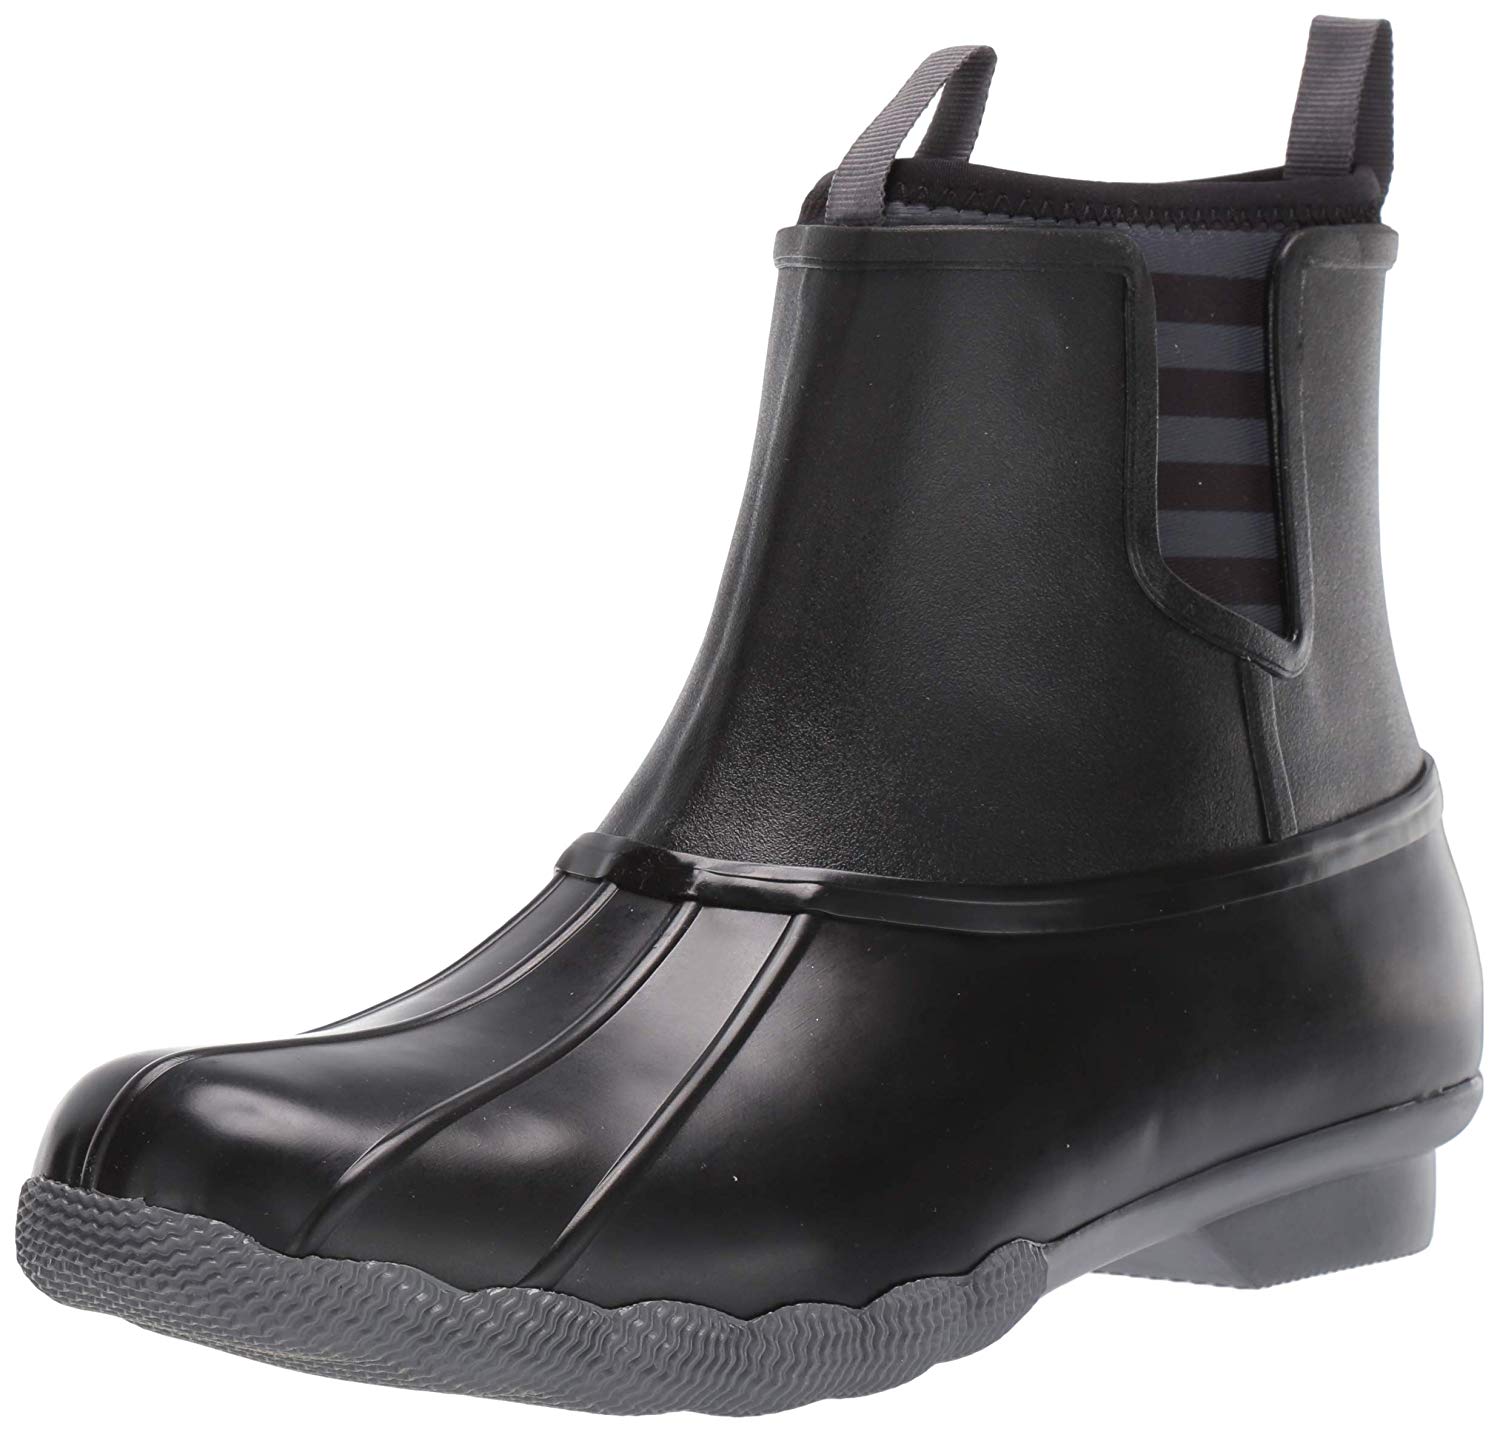 Sperry Top-Sider Women's Saltwater Chelsea Rubber Boots, Black, Size 6. ...